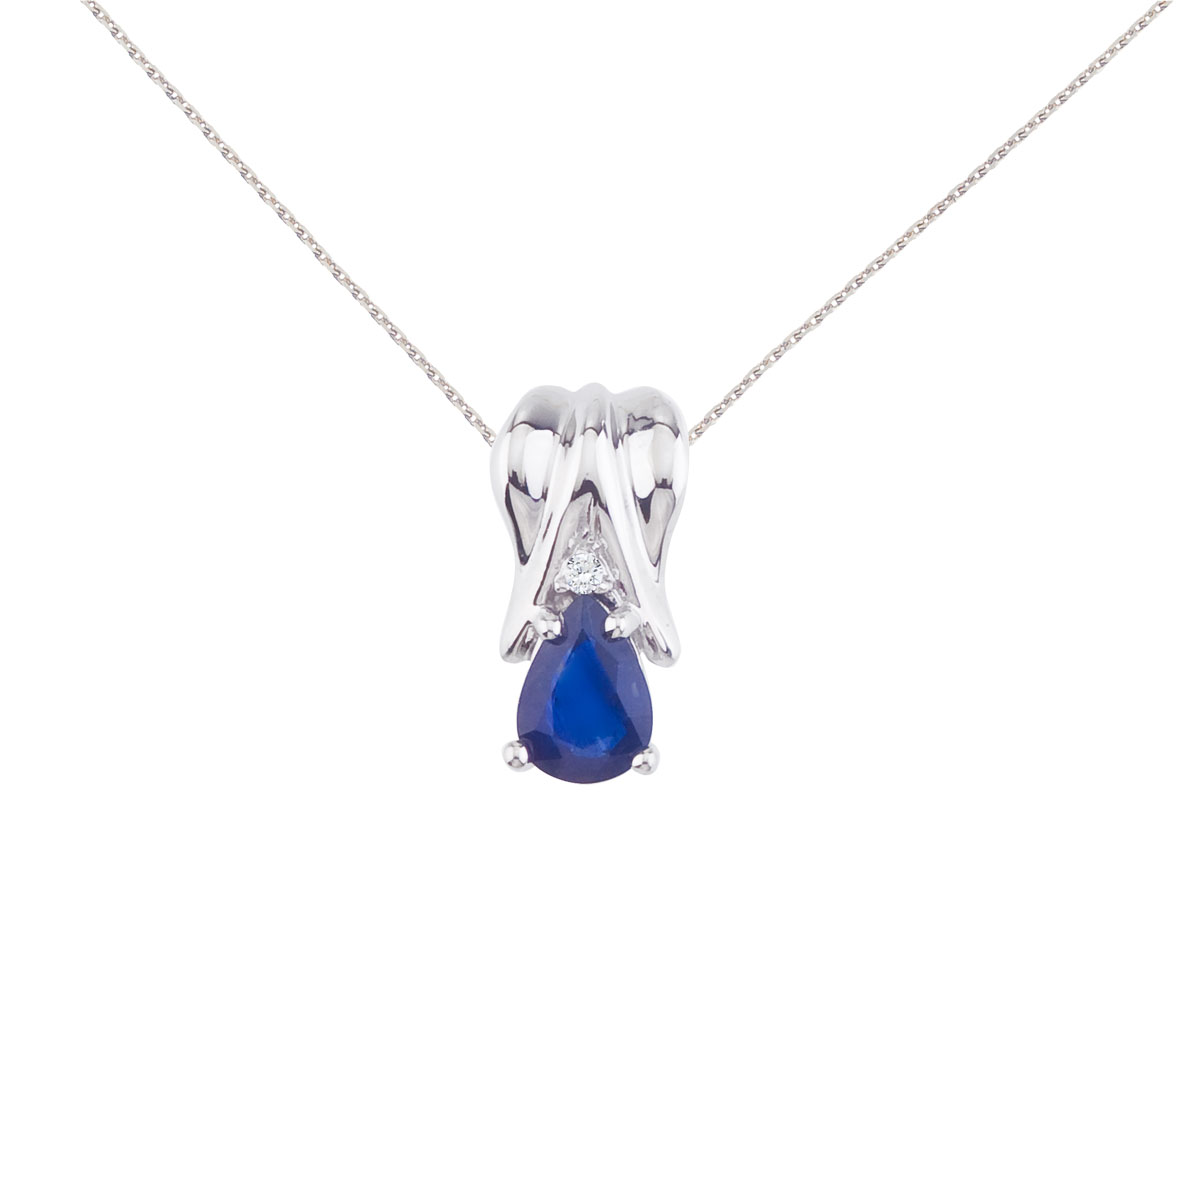 7x5 mm natural sapphire diamond accented pendant in 14k yellow gold.